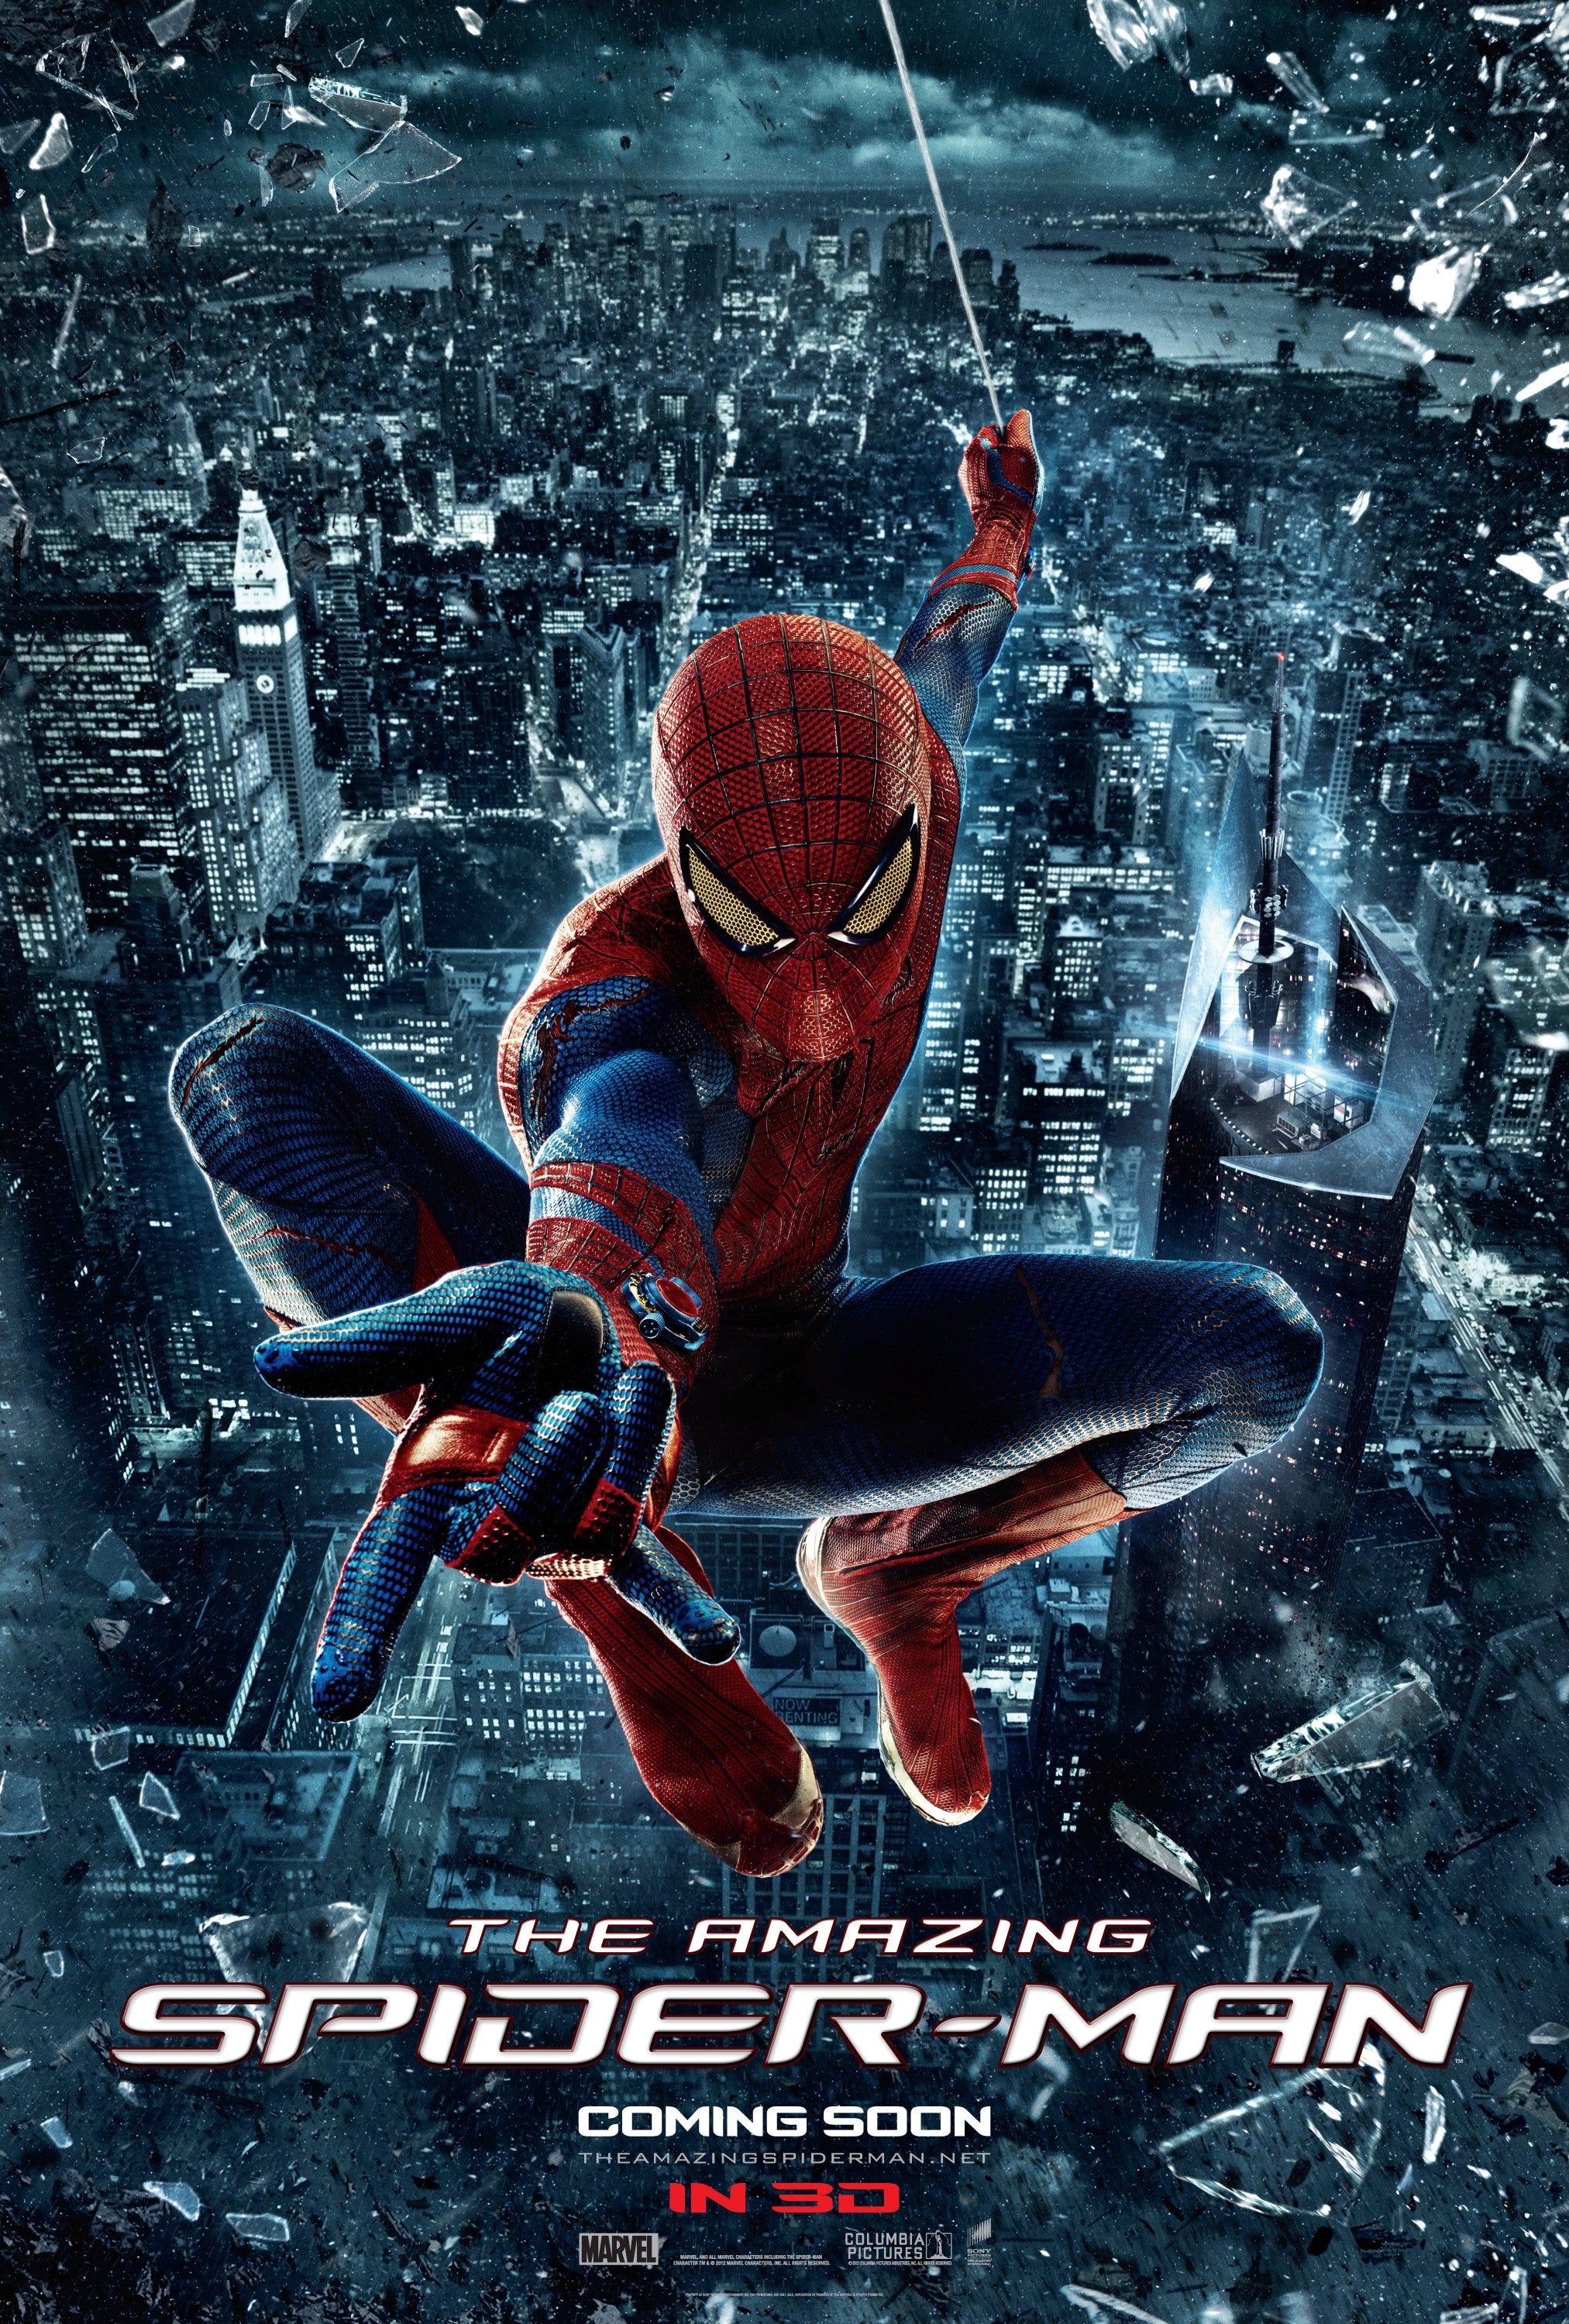 In Defense of THE AMAZING SPIDER-MAN Franchise | by J.C. De Leon | Cinapse